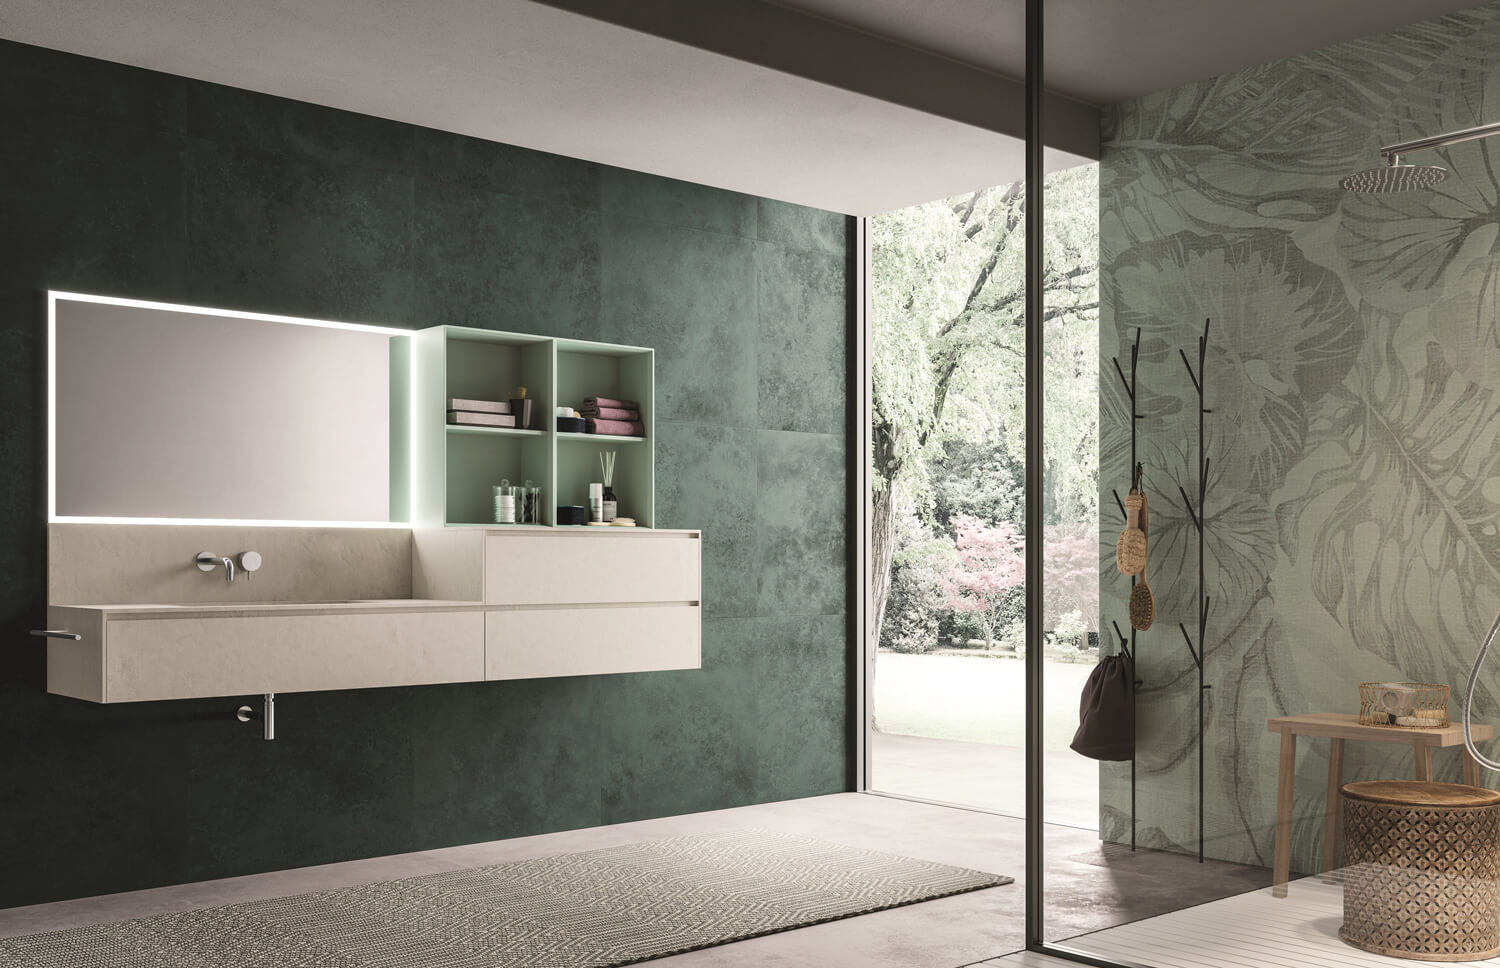 The range of Calix finishes makes it easy to find those that will best fit the palette of choice for your bathroom. Shown: White Cement vanities with shelves in Verde Salice matte lacquer. Moon mirror with frontal perimeter LED lights. 